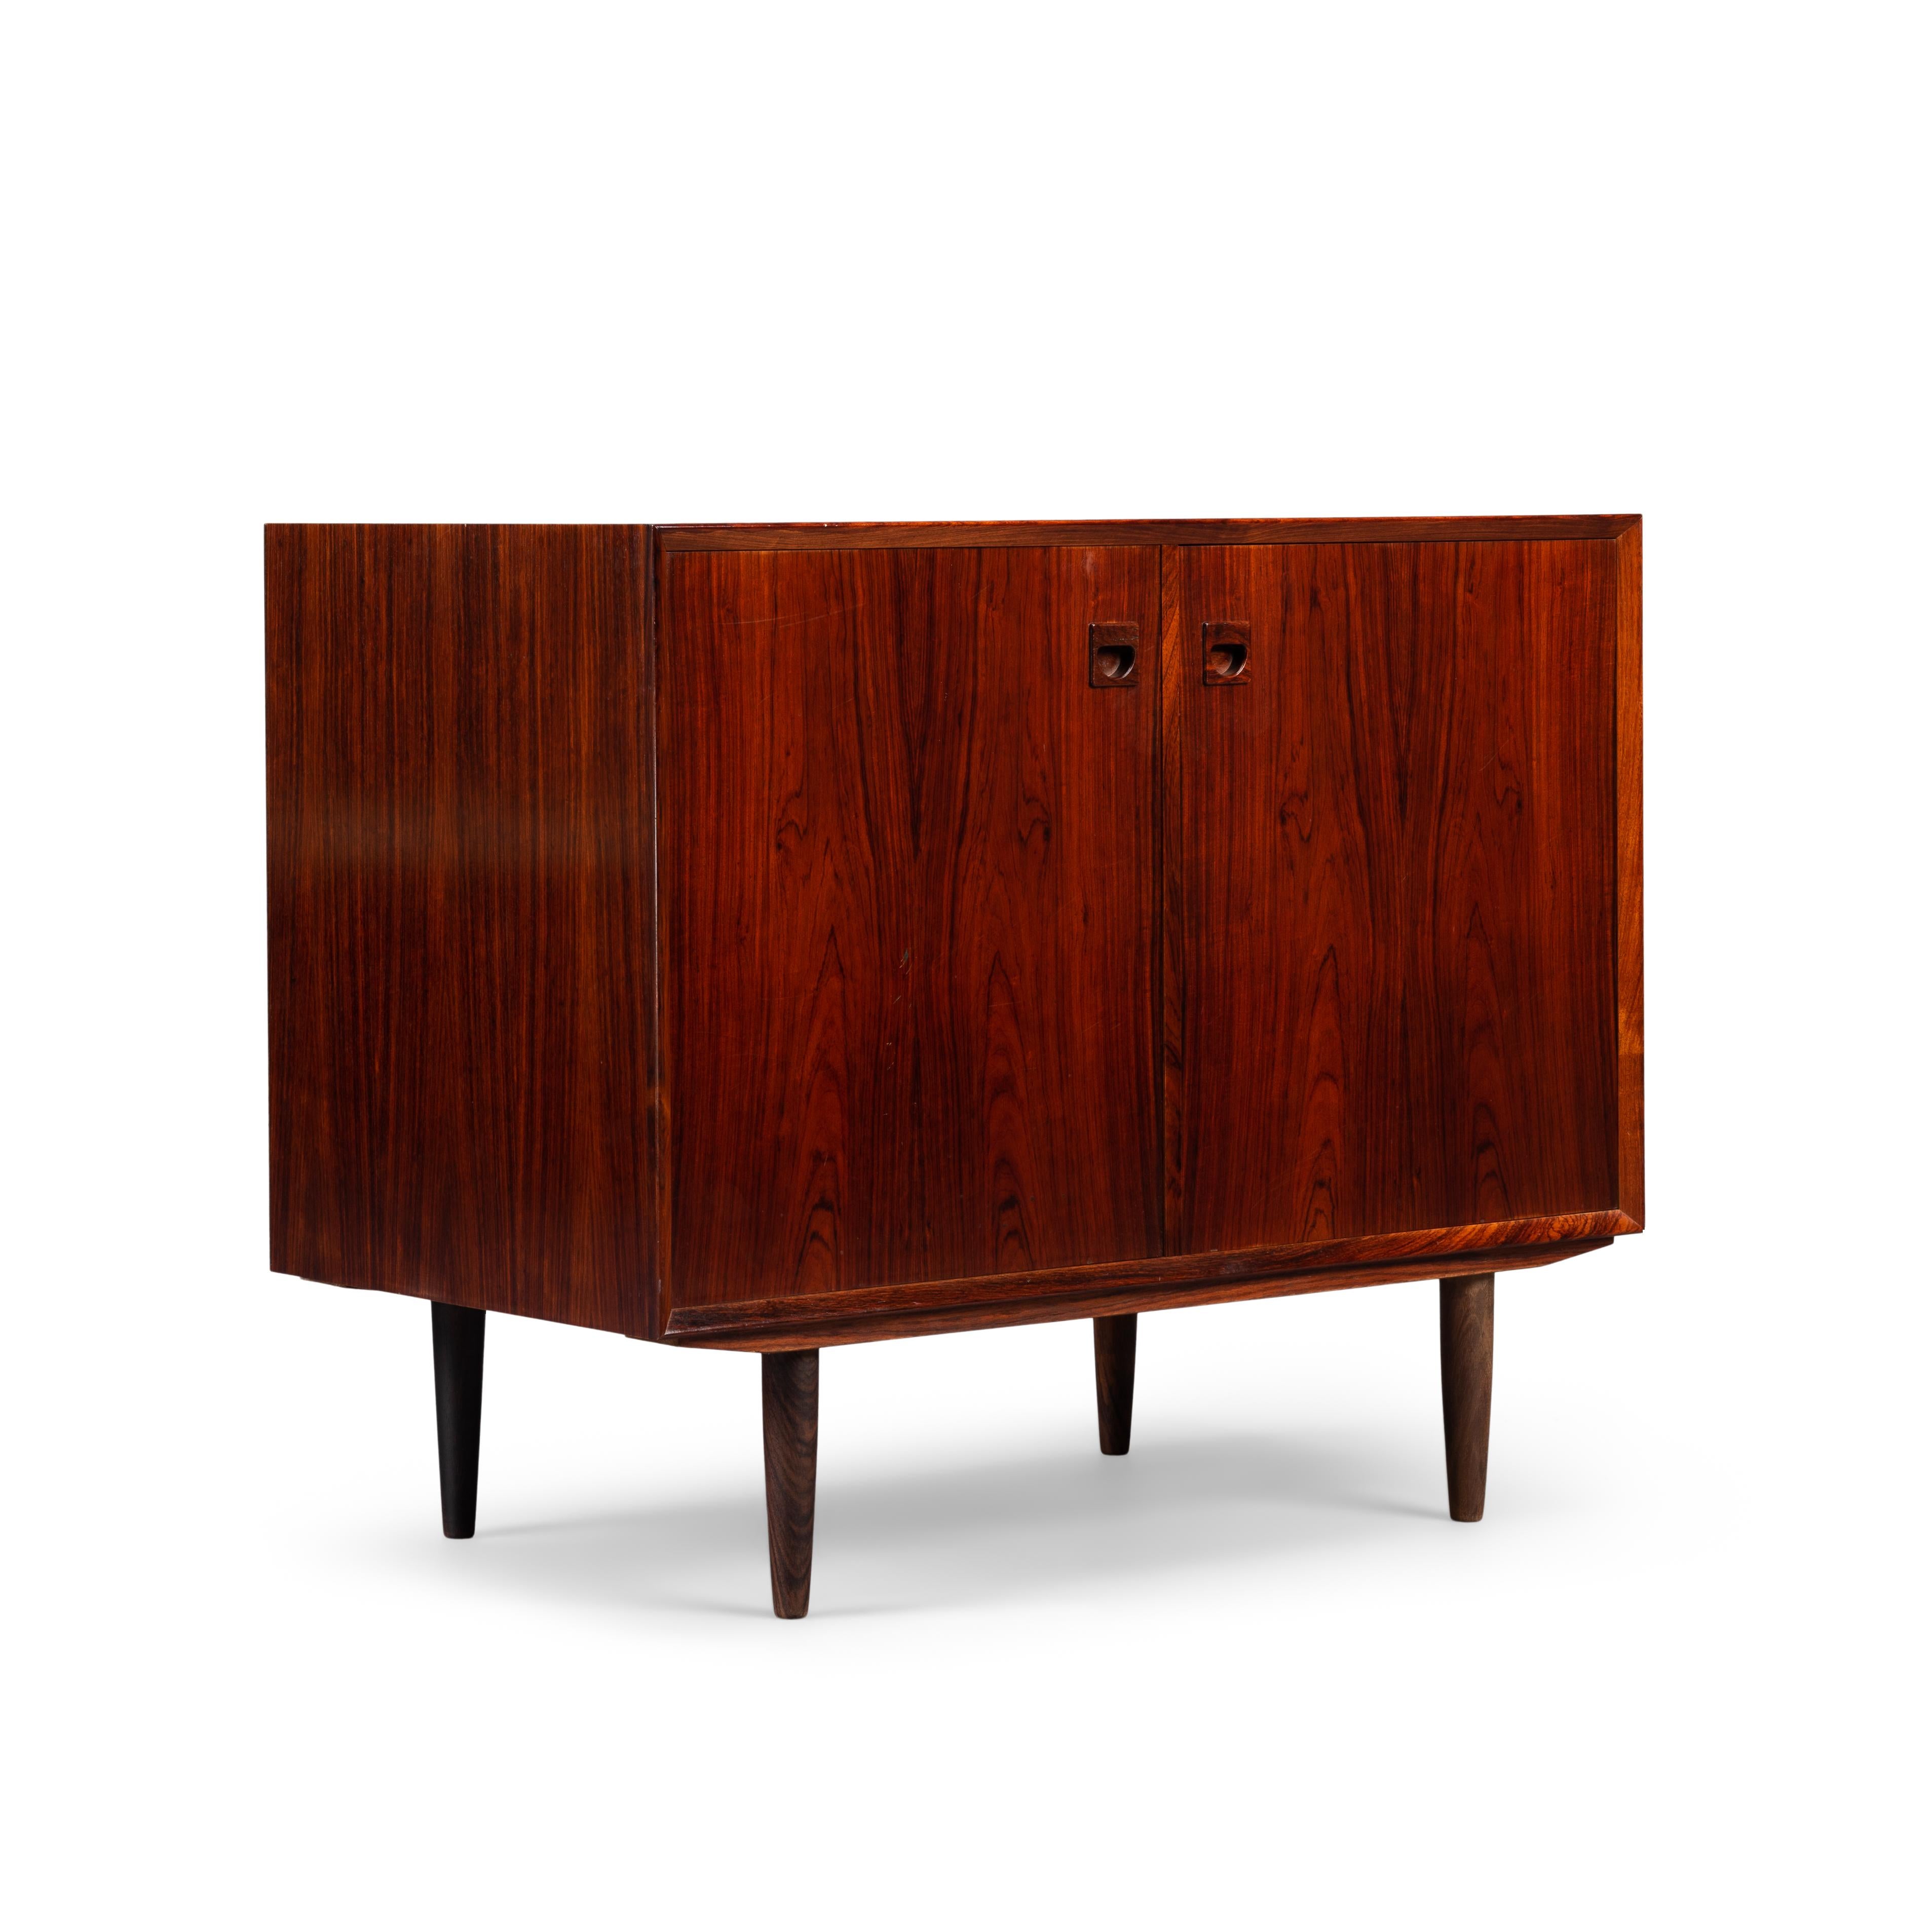 Two-door 'Tight Fit' rosewood sideboard designed by E. Brouer and manufactured by Brouer Møbelfabrik. An eyecatcher in every hallway, study or living! This sideboard has two doors, each opening up to one segment. Behind each door is a height